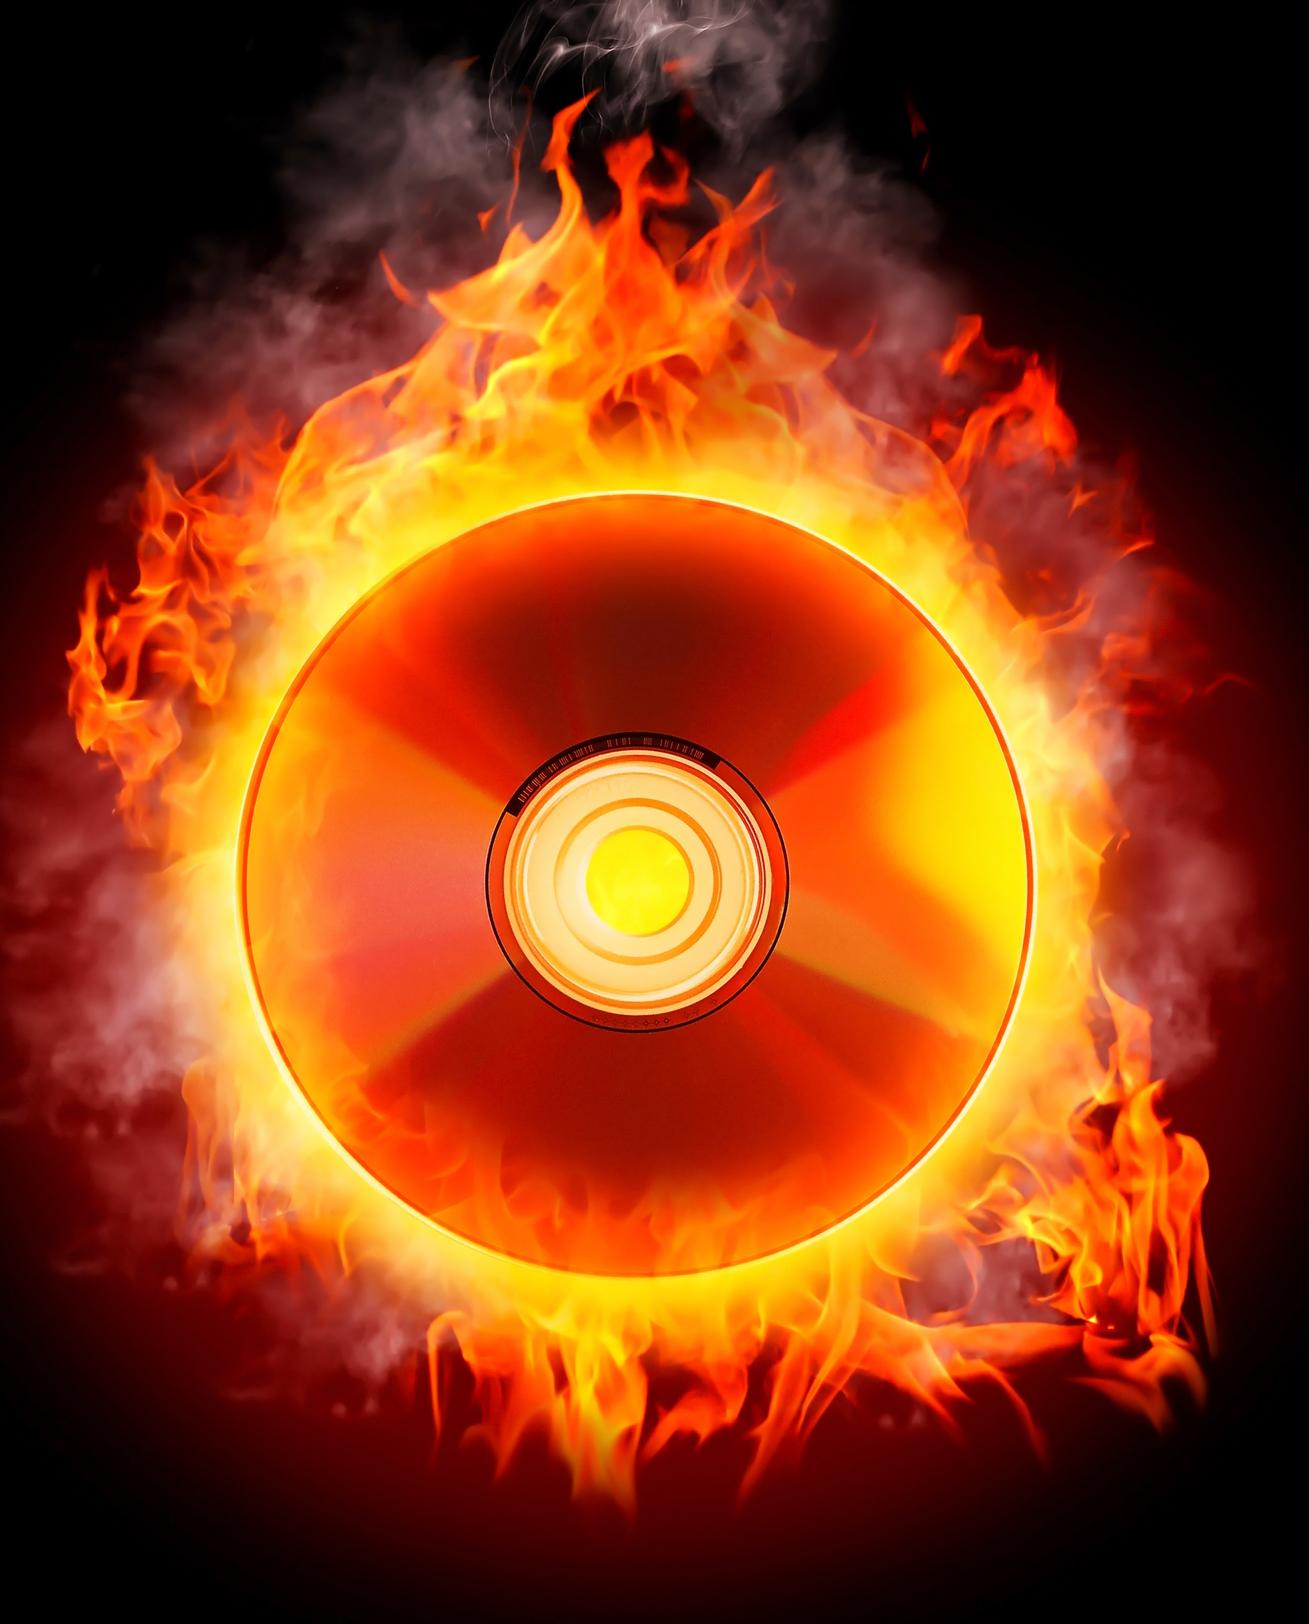 Music Fire for Android - APK Download